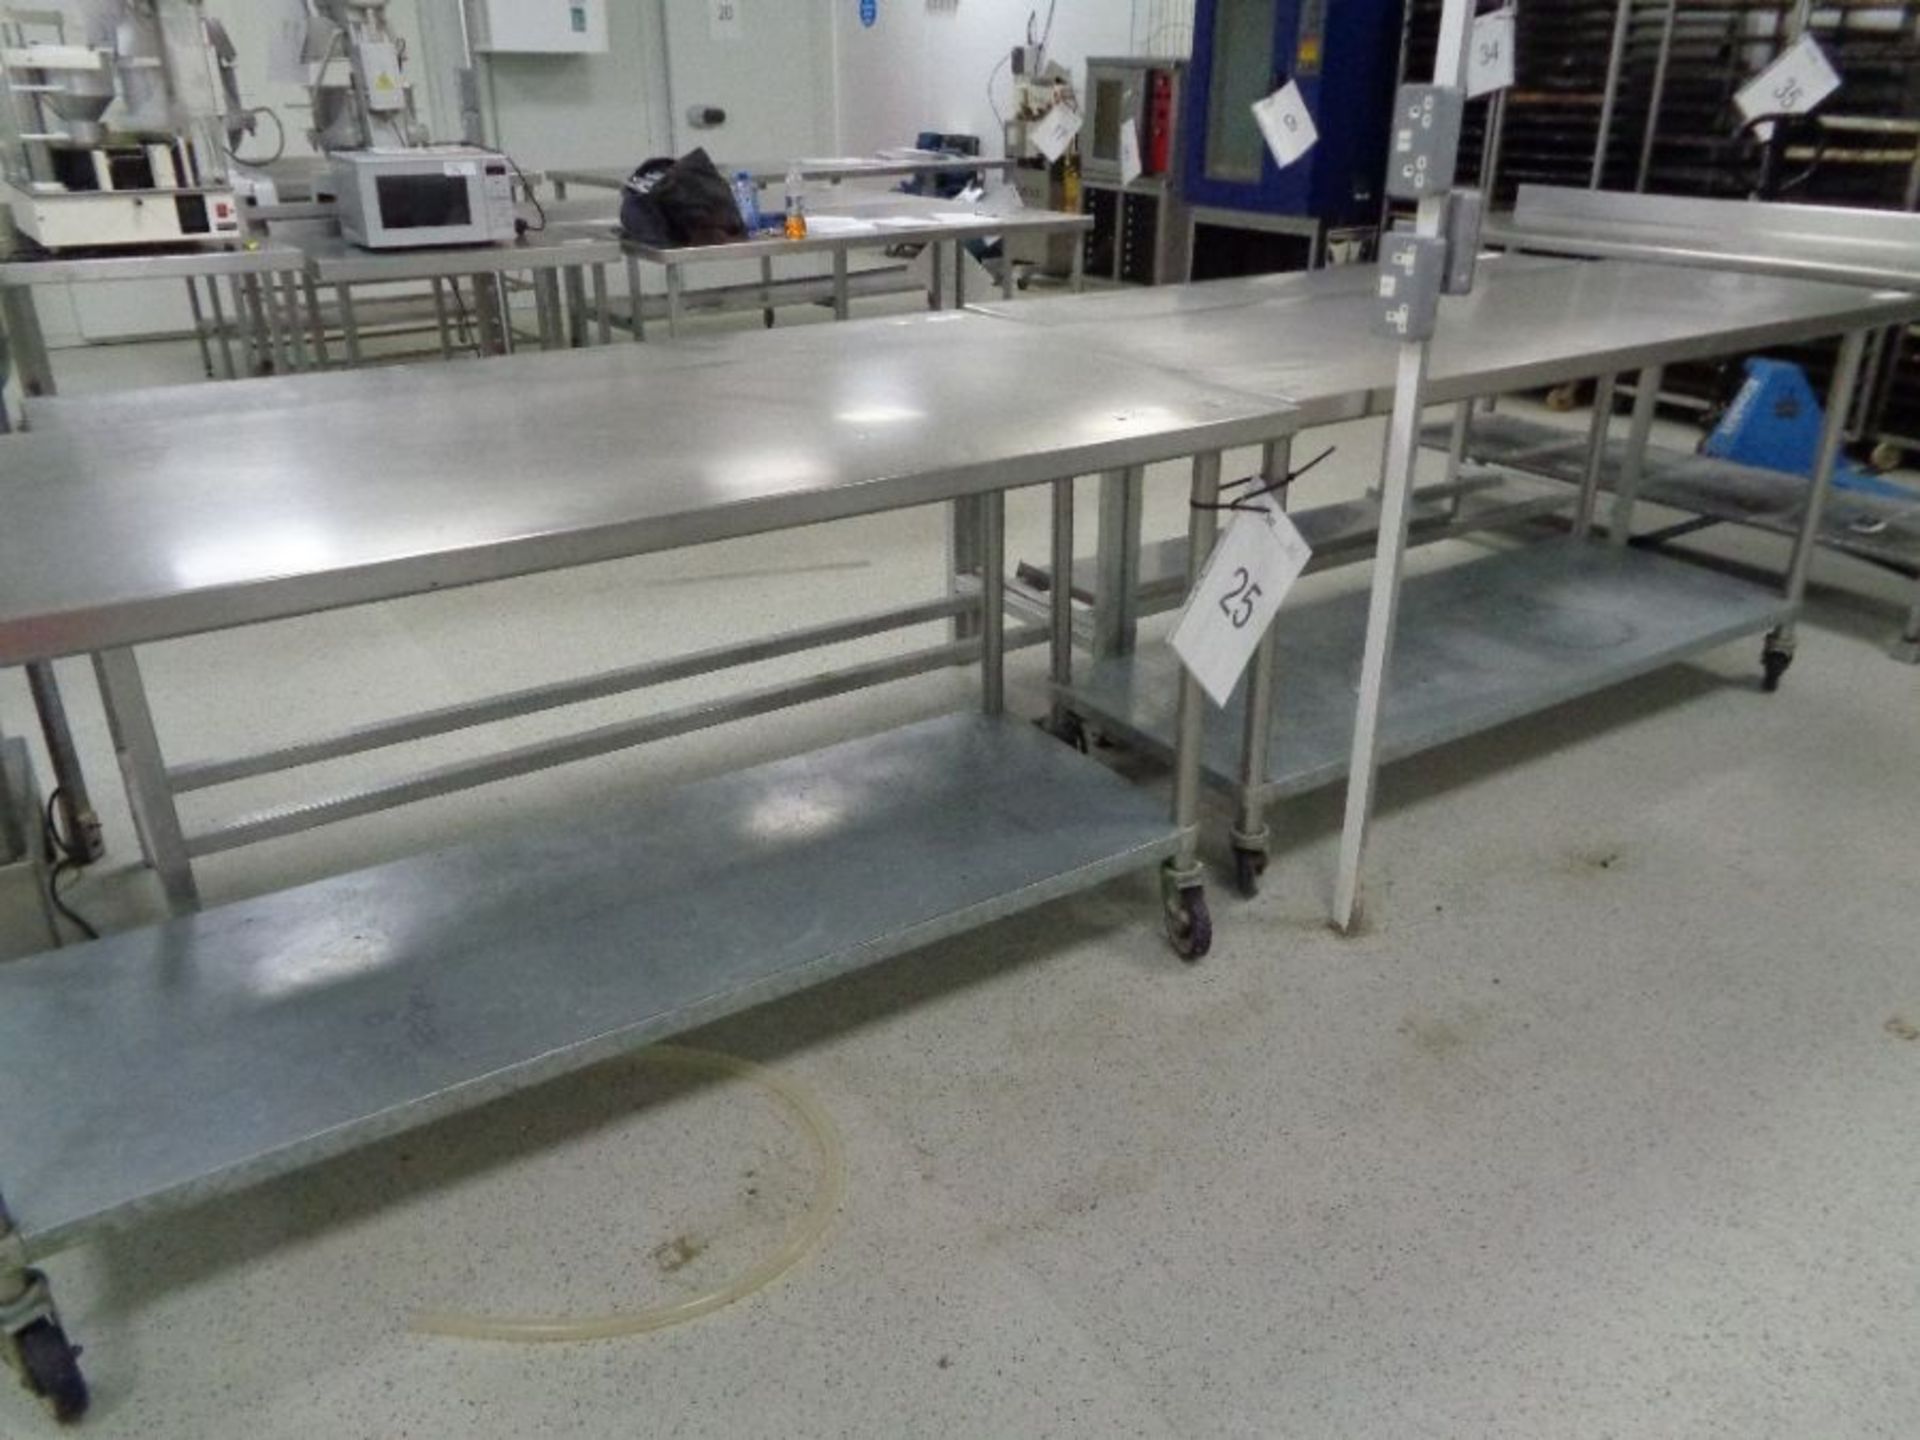 2 x Stainless Steel work tables 2m x 1m as lotted